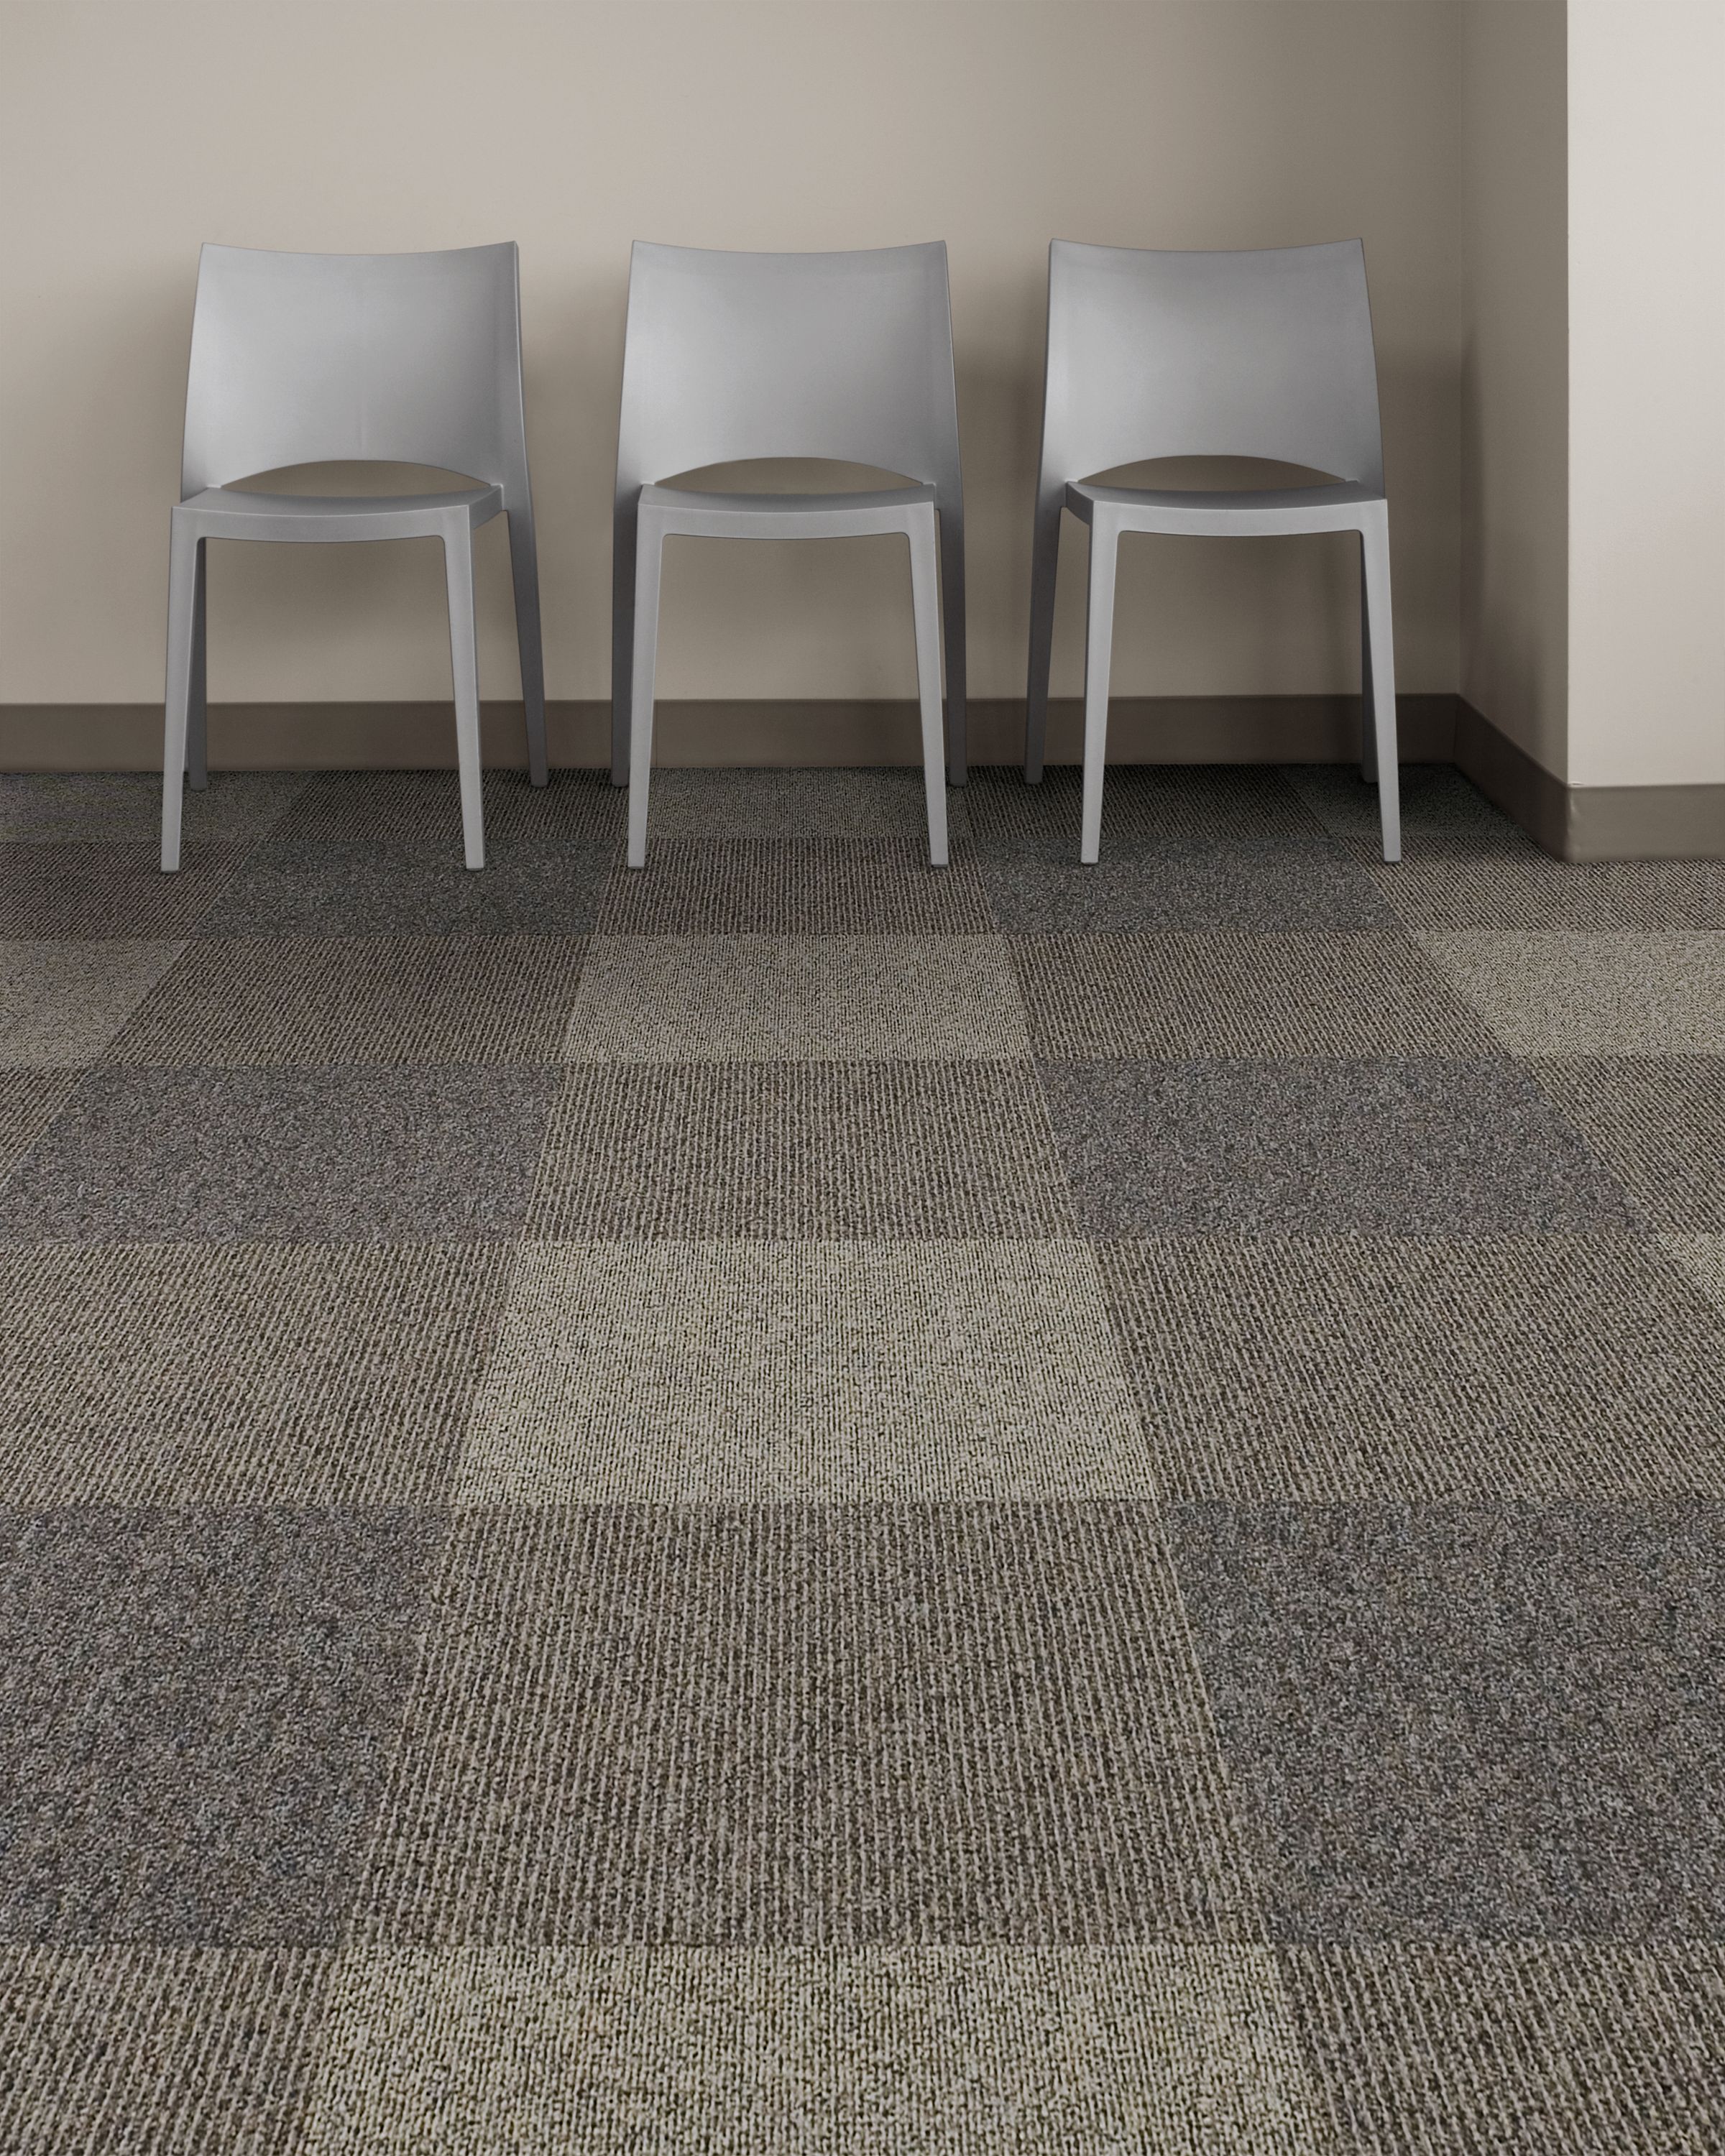 Interface Broomed, Grooved and Brushed carpet tile in room with three chairs numéro d’image 7